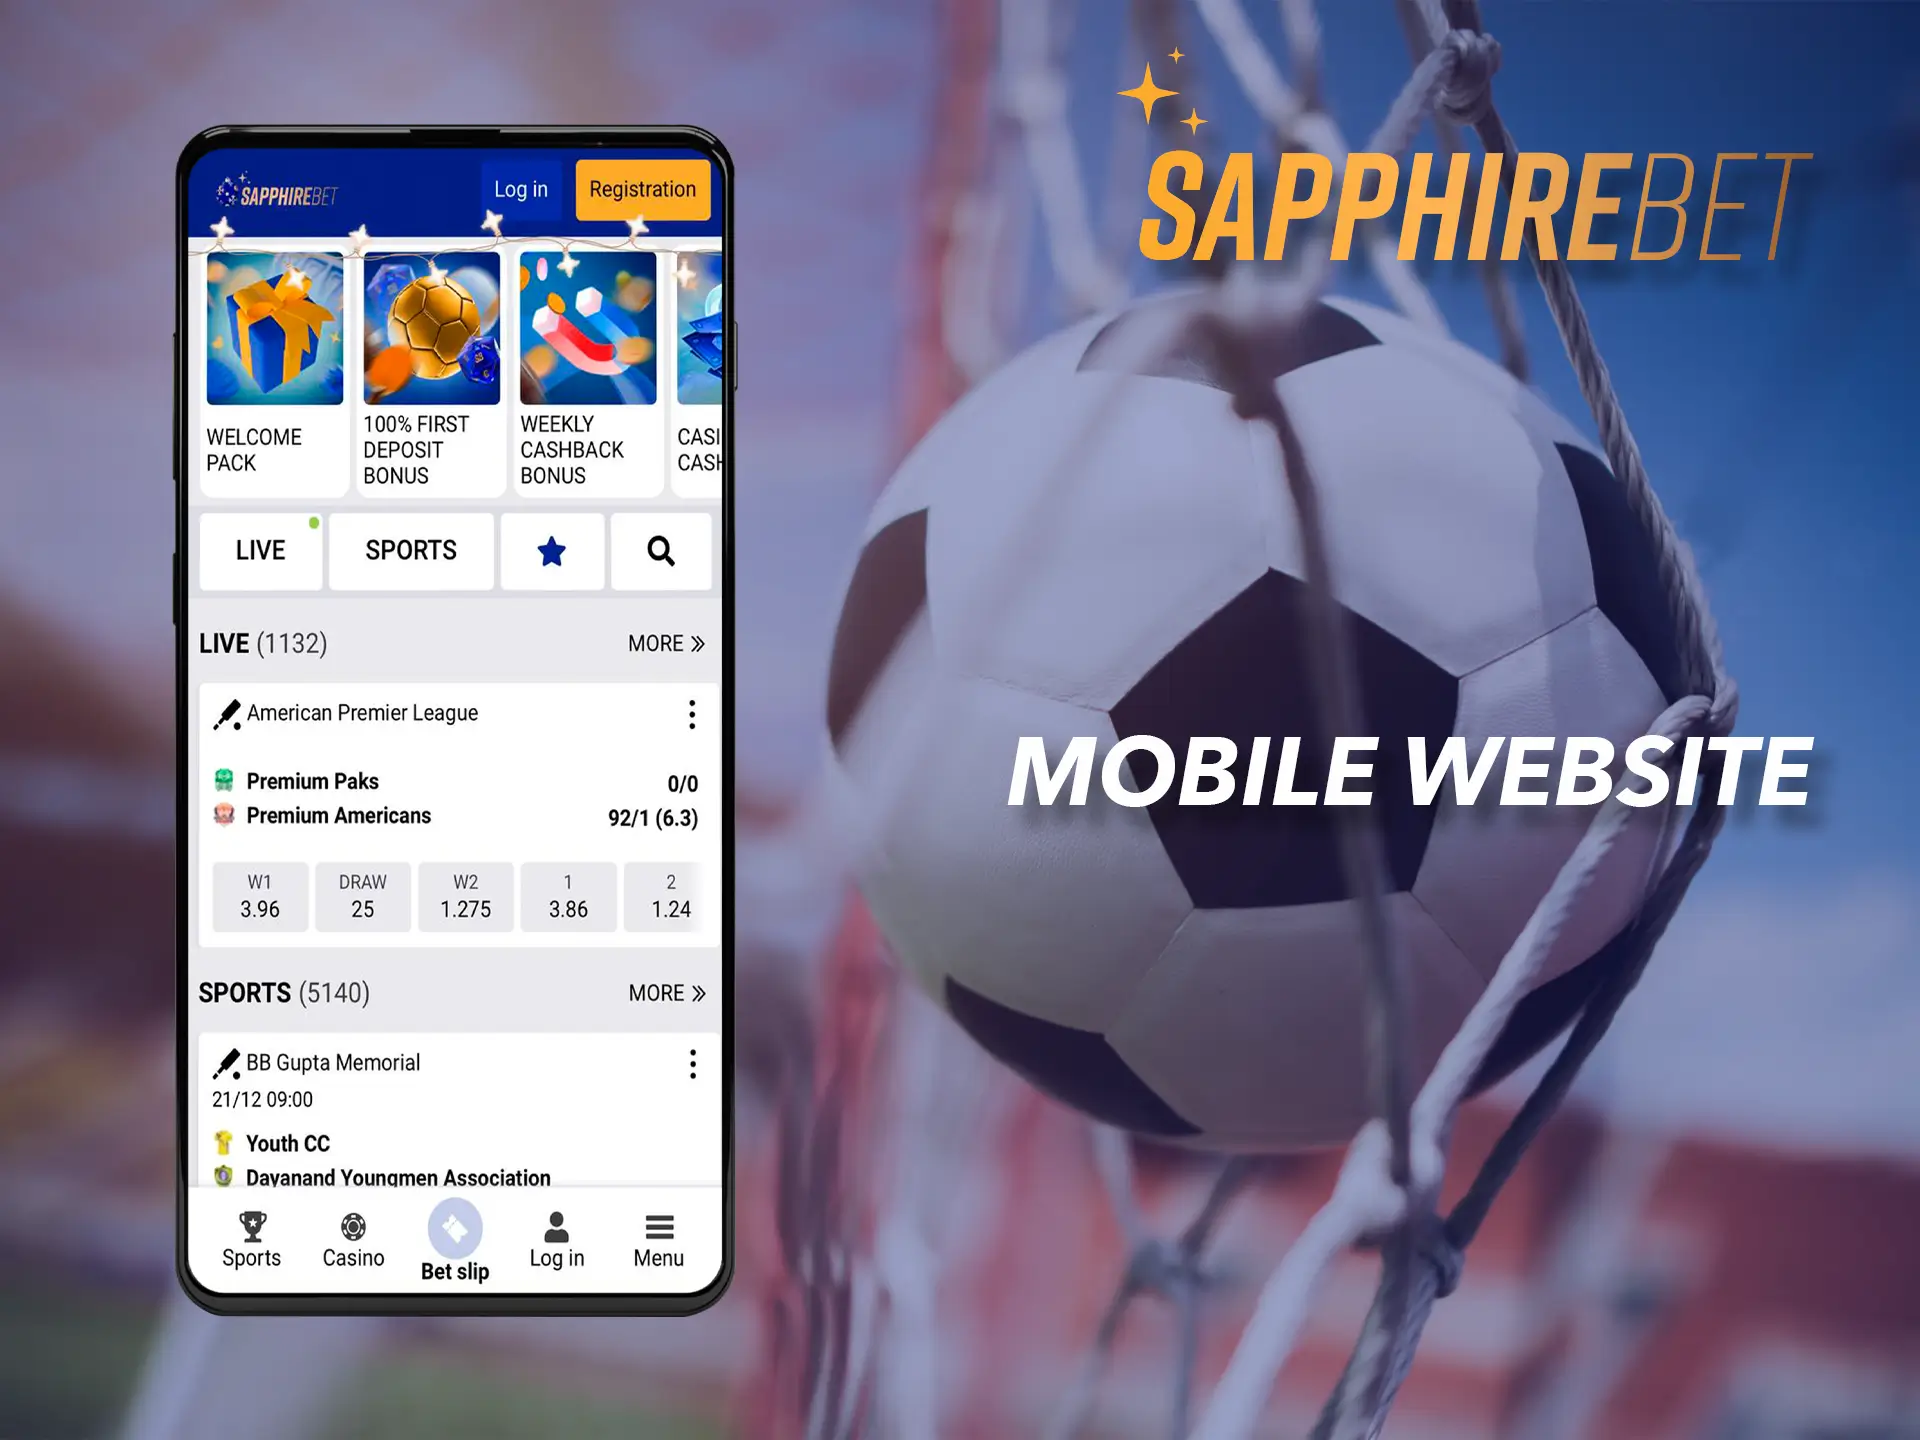 Sapphirebet's mobile site works and adapts perfectly on any device.